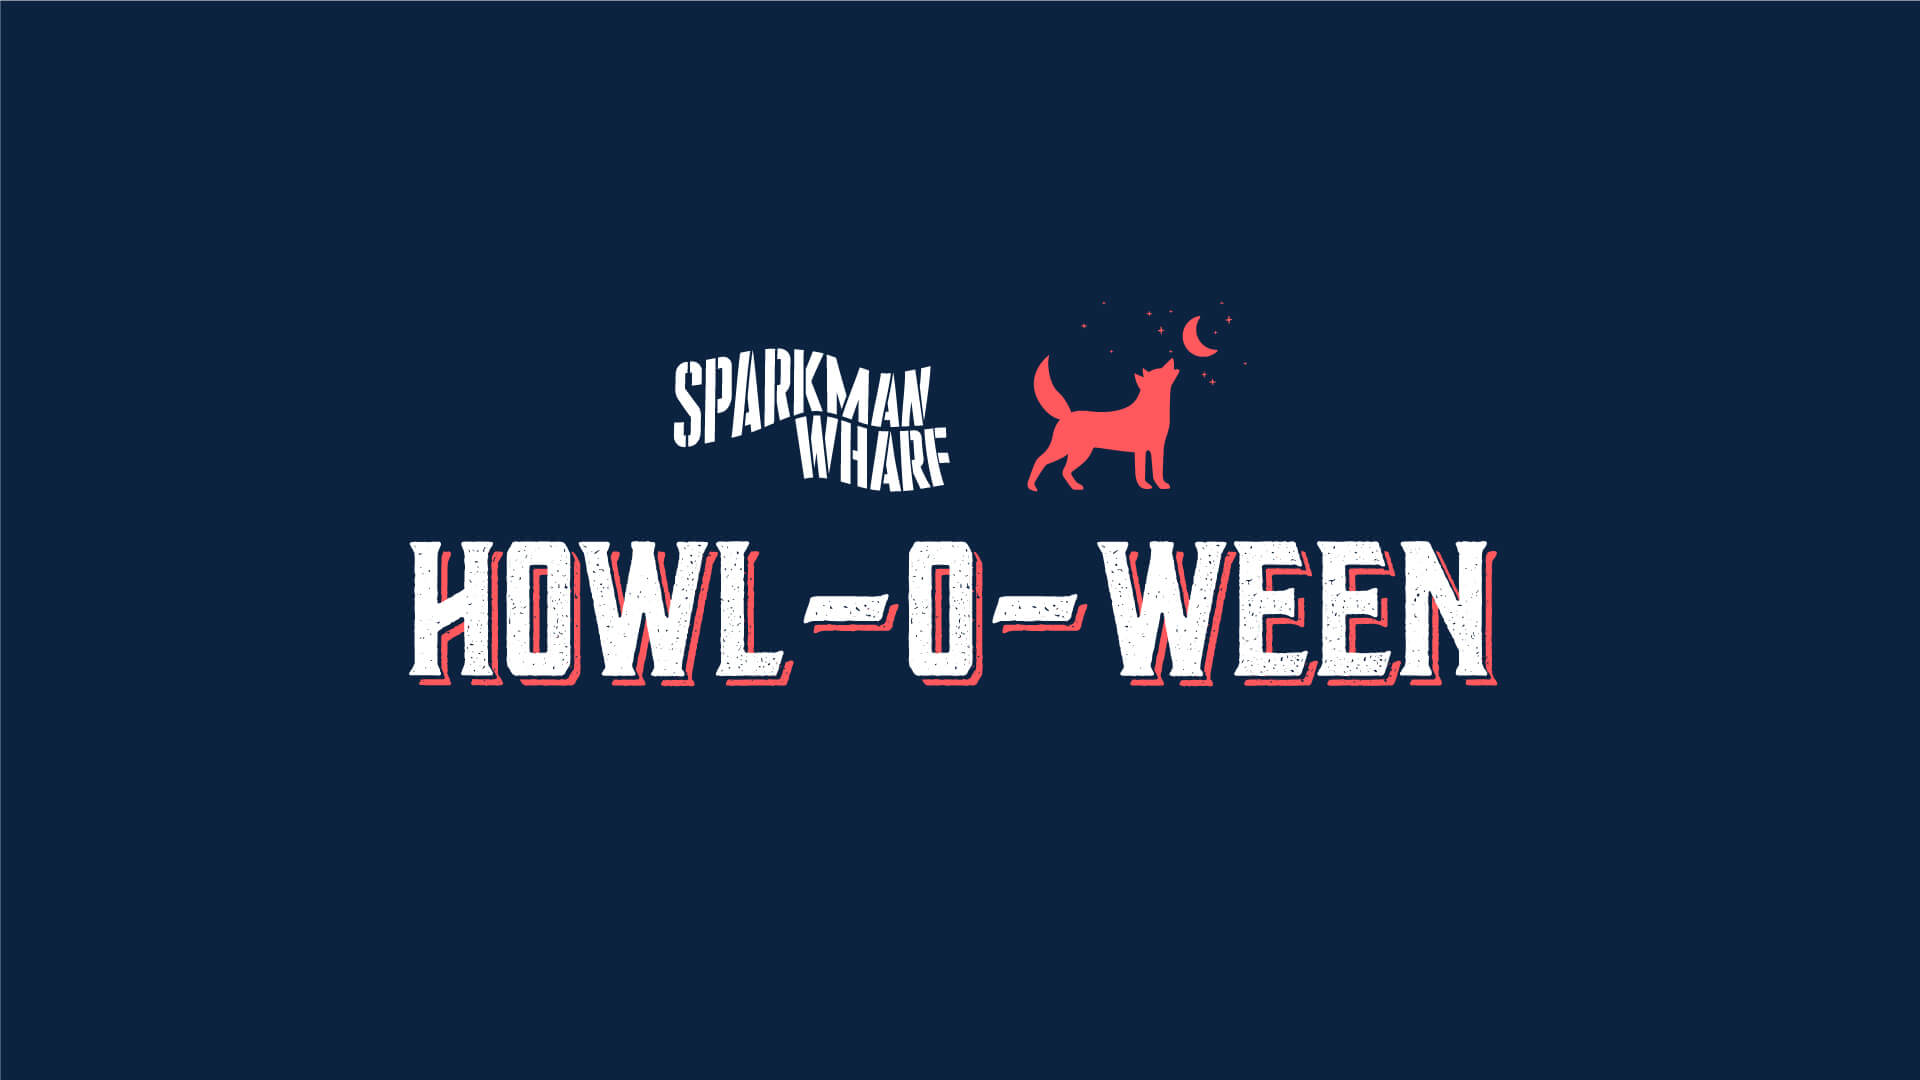 A graphical representation of Howl-O-Ween at Sparkman Wharf